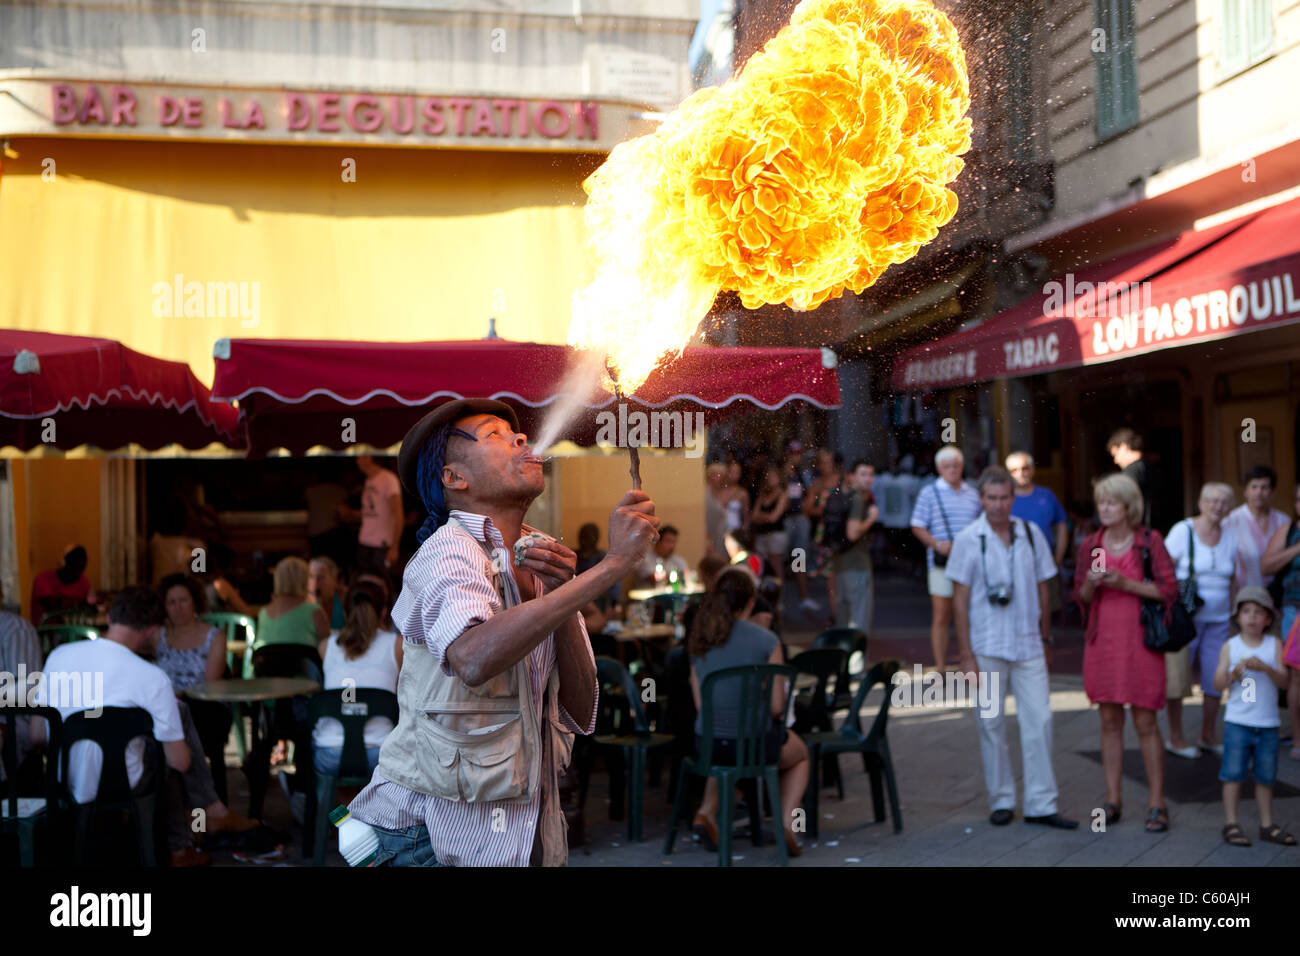 Fire breather, street entertainer, Nice, France Stock Photo